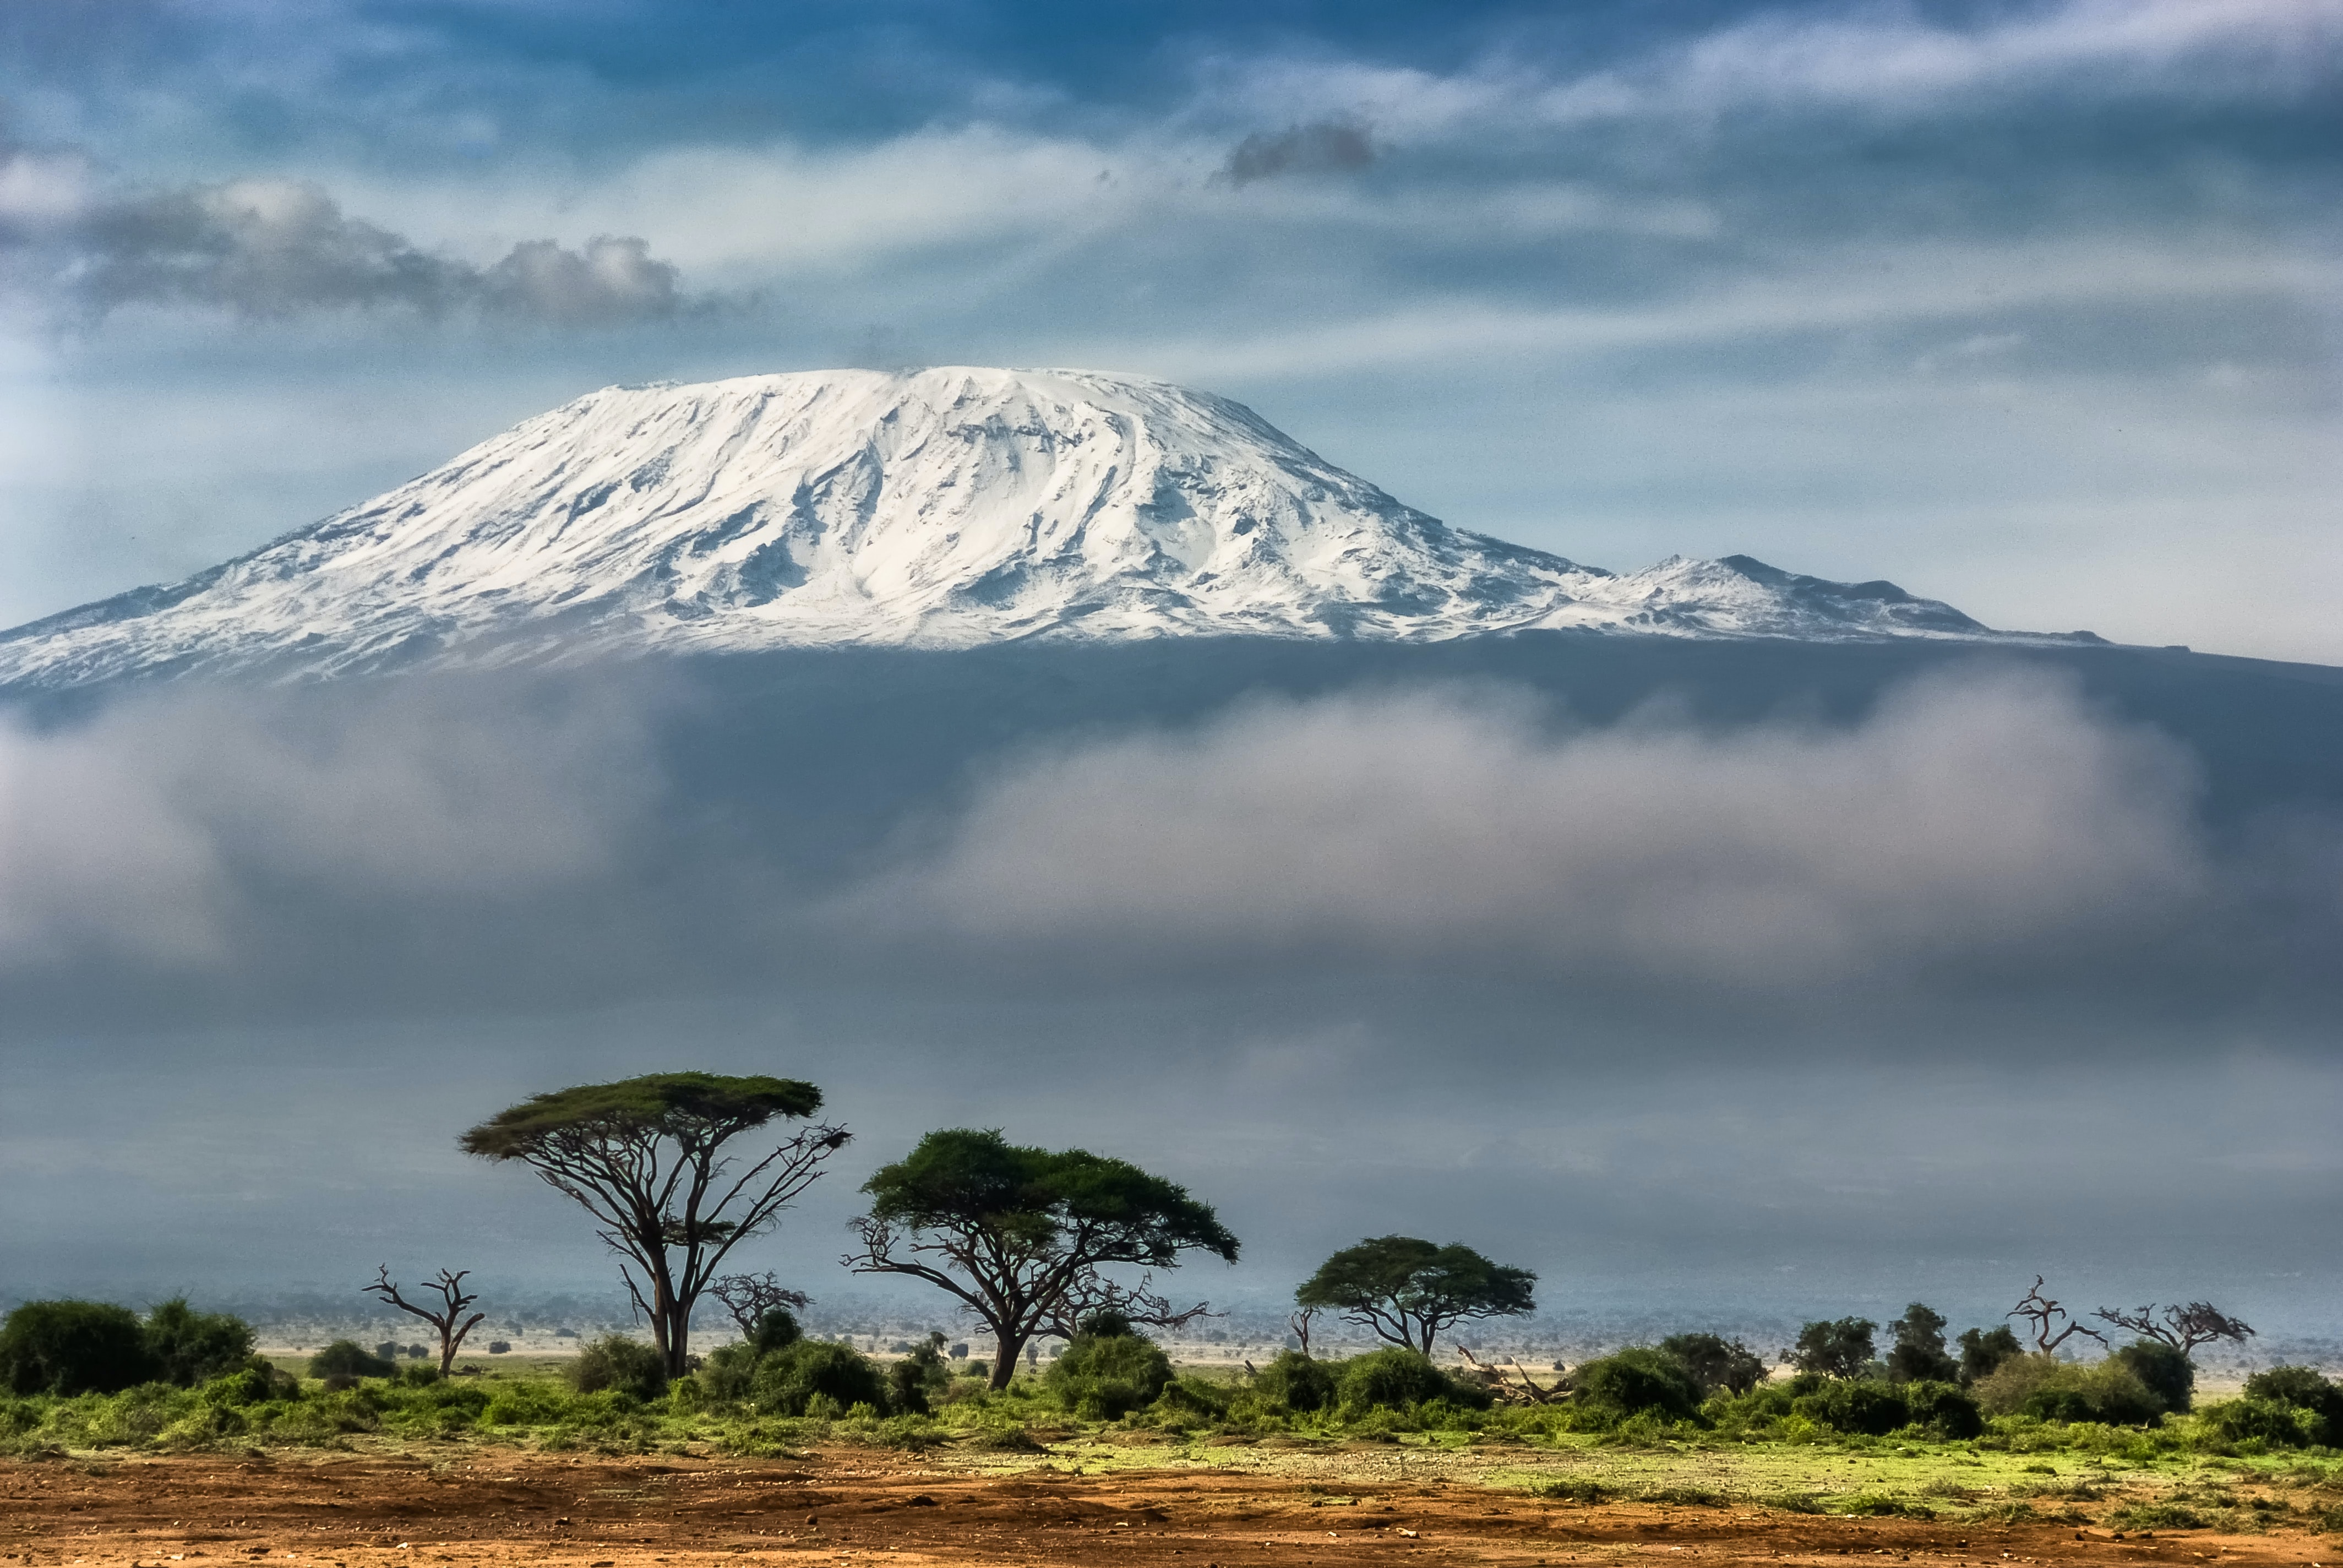 Kilimanjaro's view from the Amboseli National Park